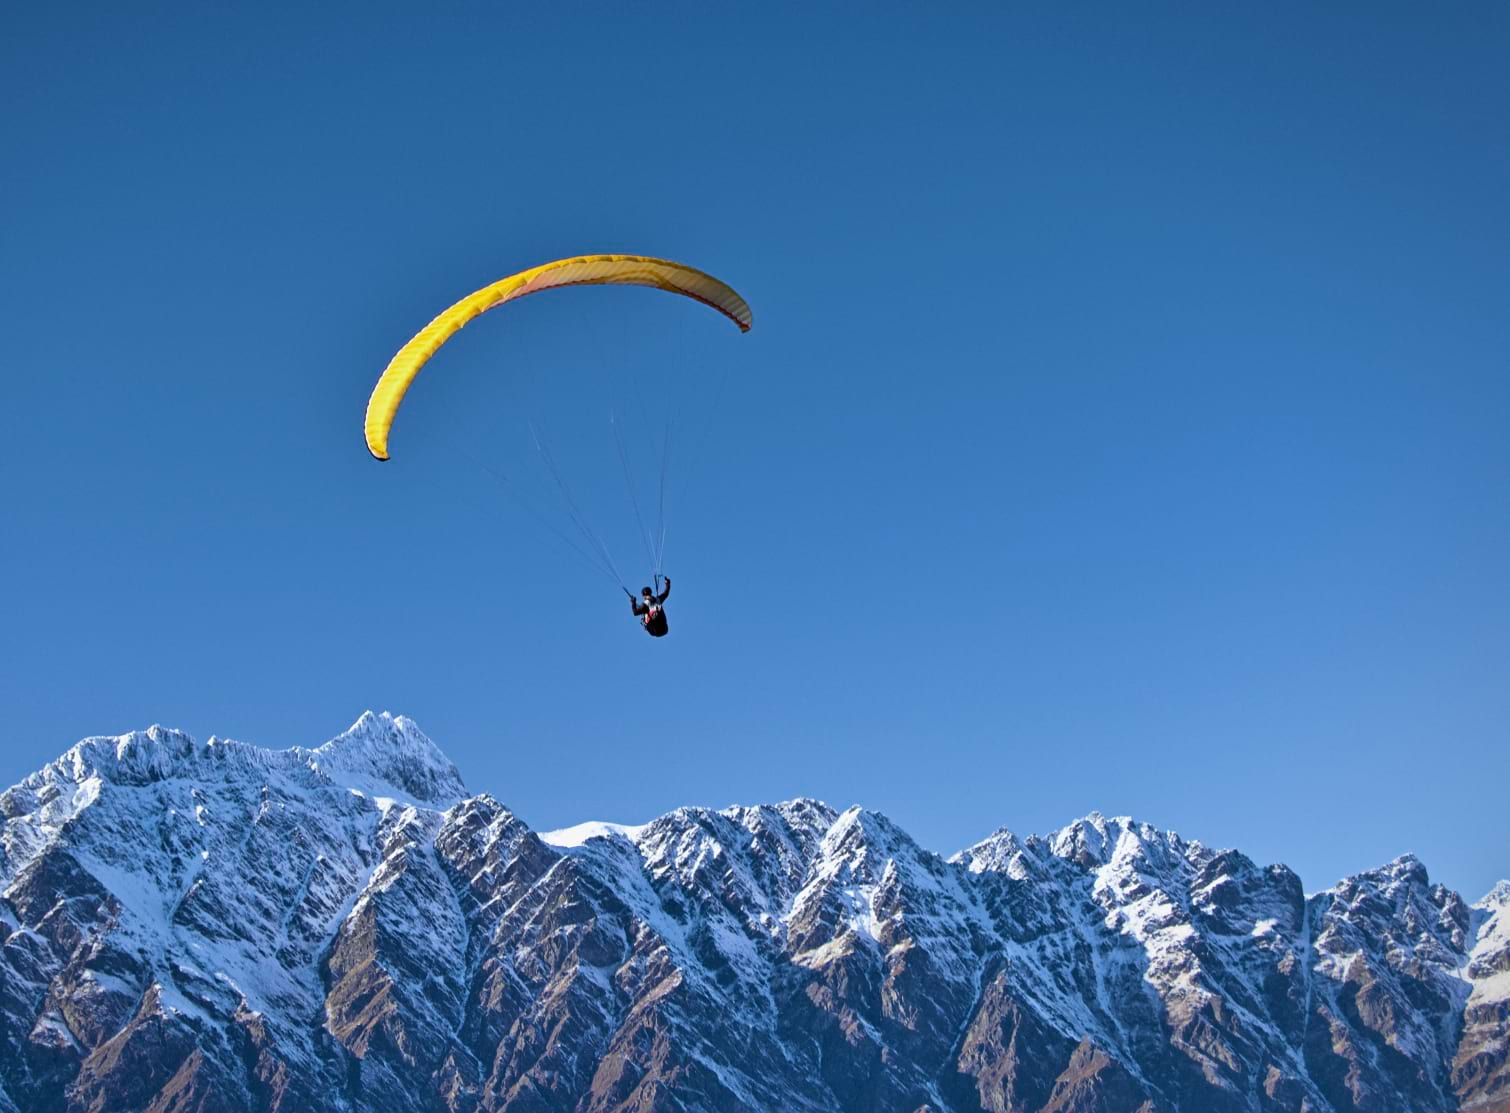 Paragliding over snowy peaks